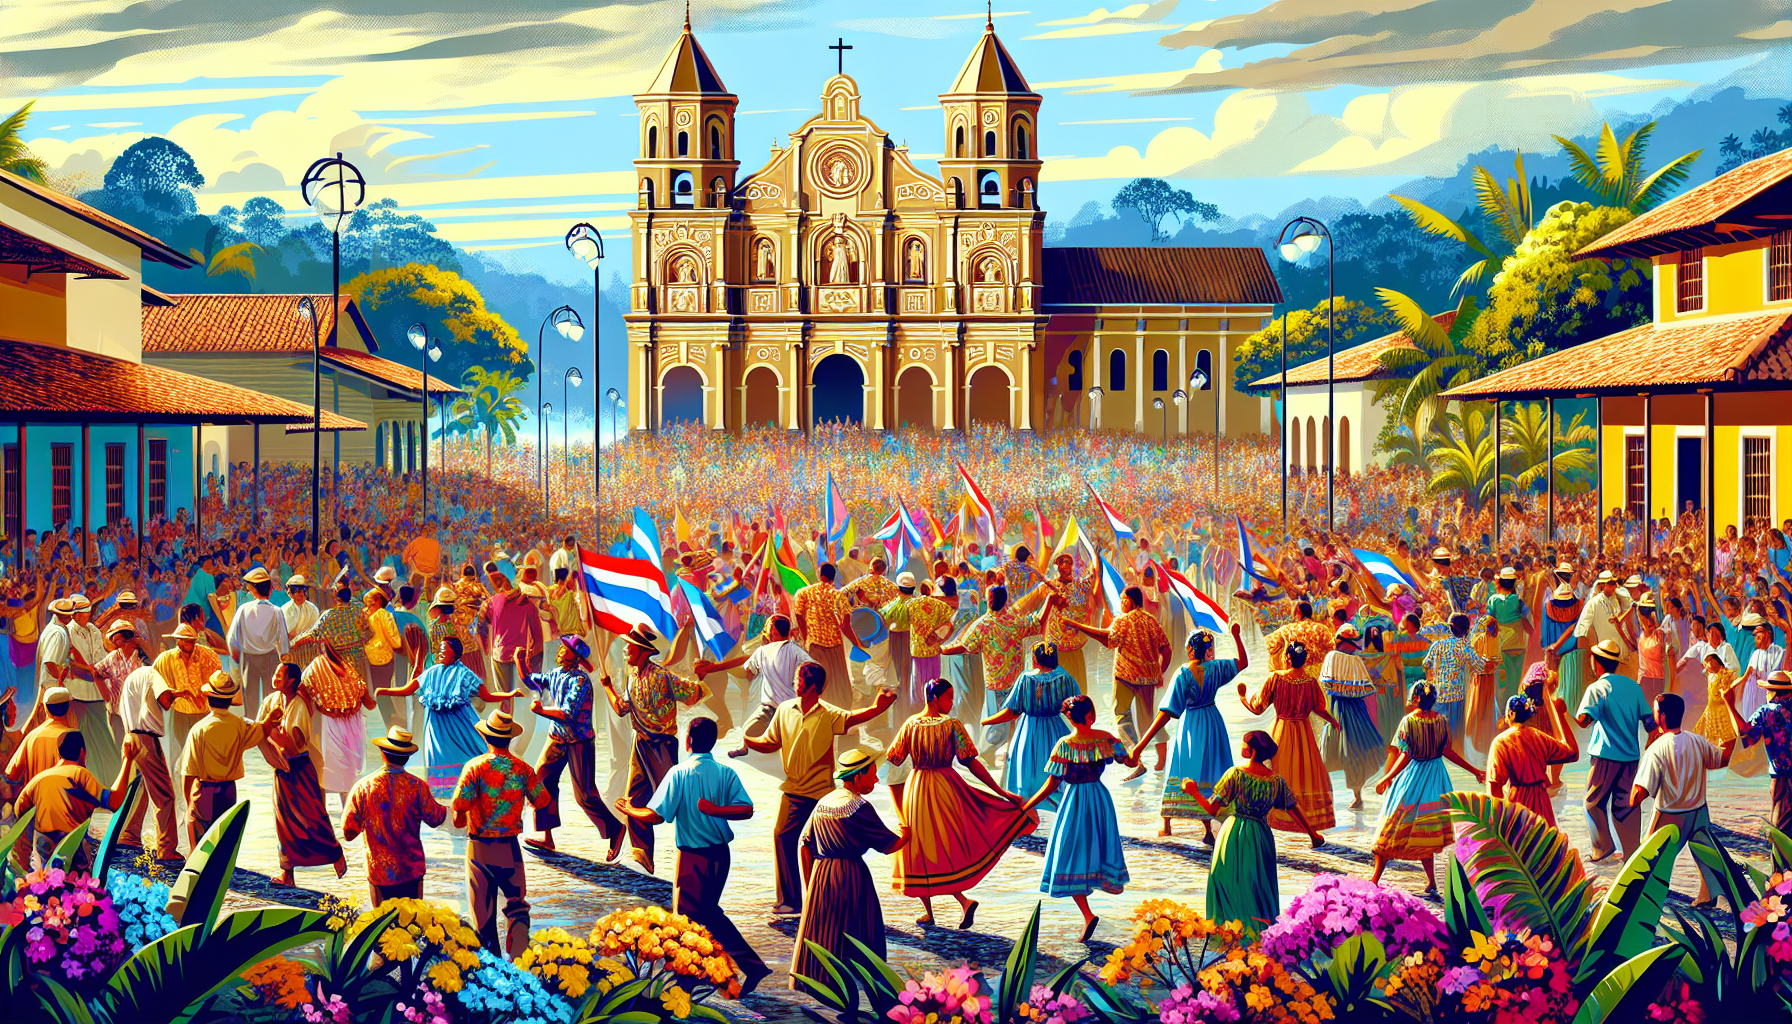 Create an image showing a vibrant Christian celebration in Costa Rica. Include a beautiful church in the background, with worshippers dressed in colorful traditional clothing. The scene should include